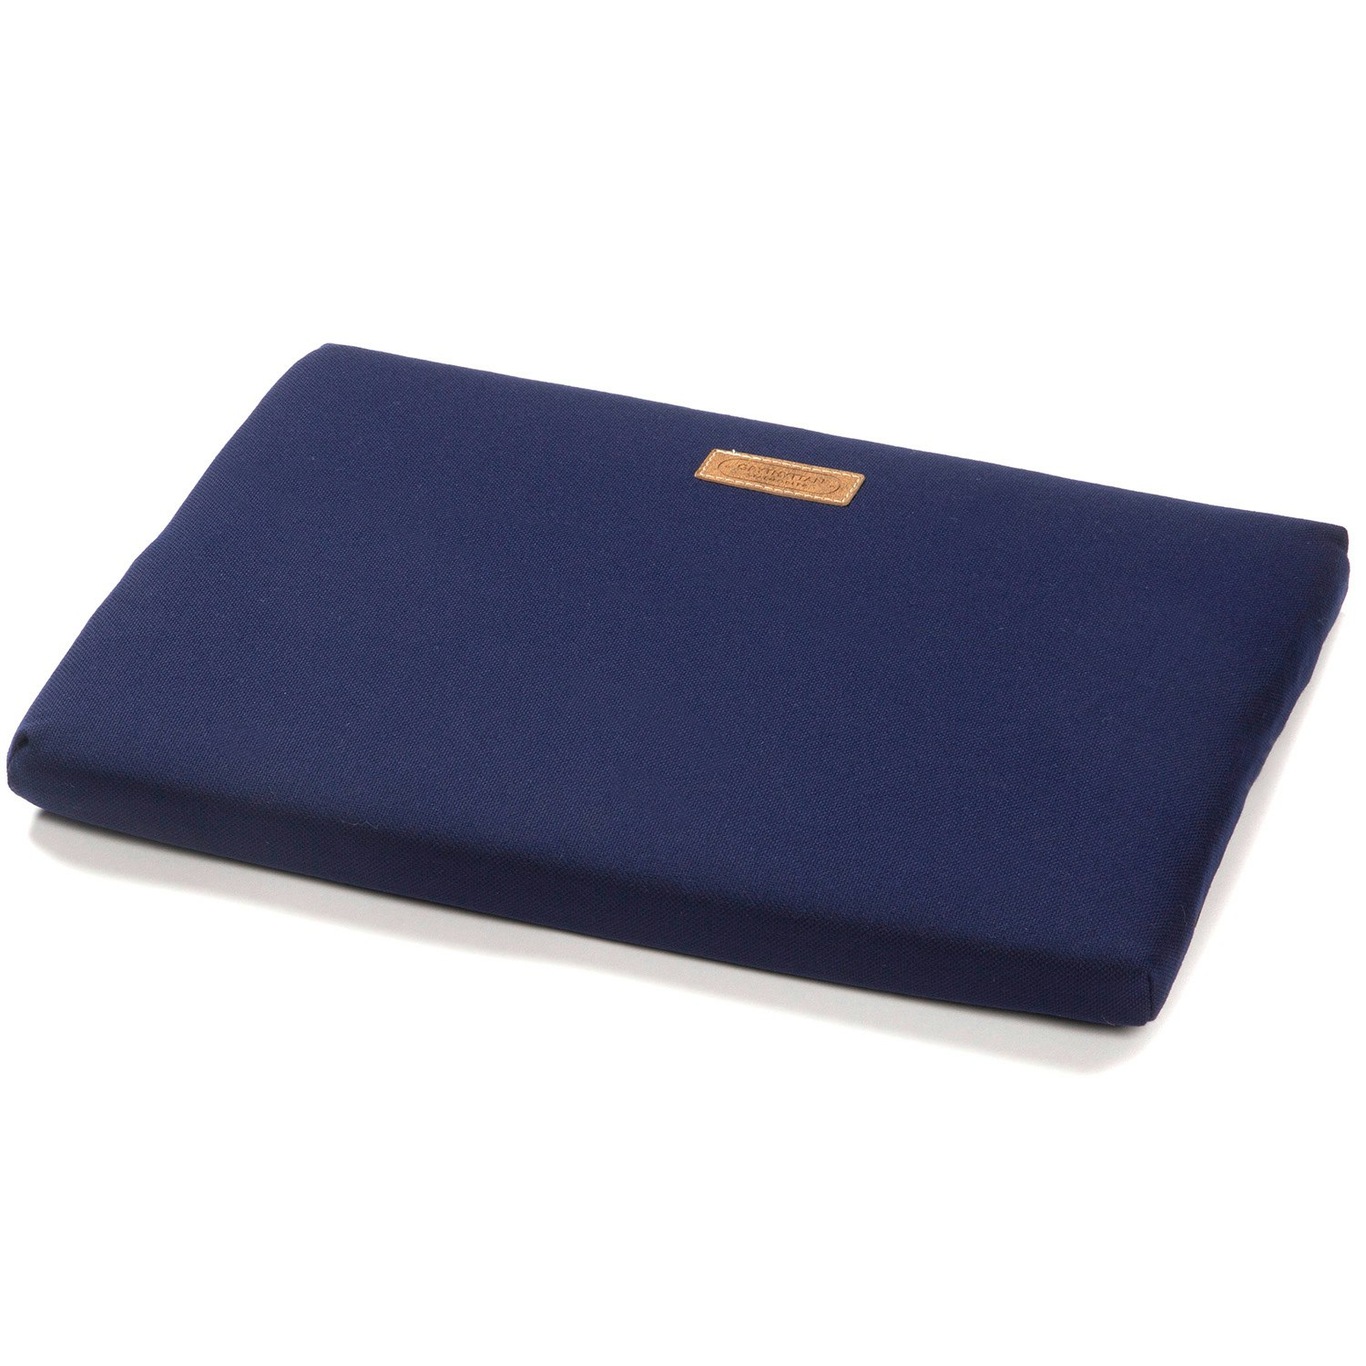 A3 Seat Cushion For Footstool, Blue